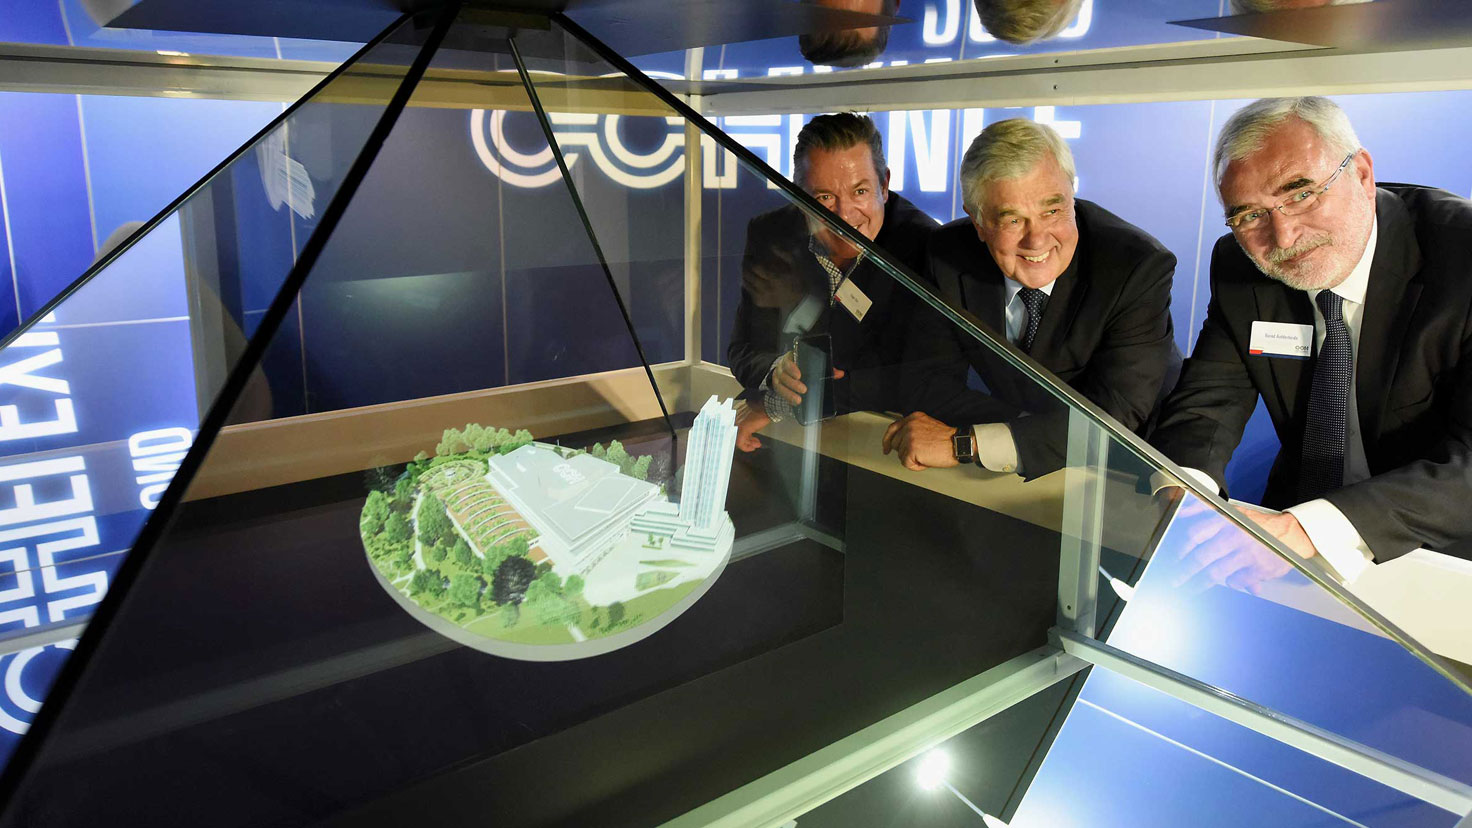 CCH showroom opening on May 30, 2017 / from left to right: Edgar Hirt, Frank Horch, Hamburg state senator of economic affairs, and Bernd Aufderheide at the hologram pyramid